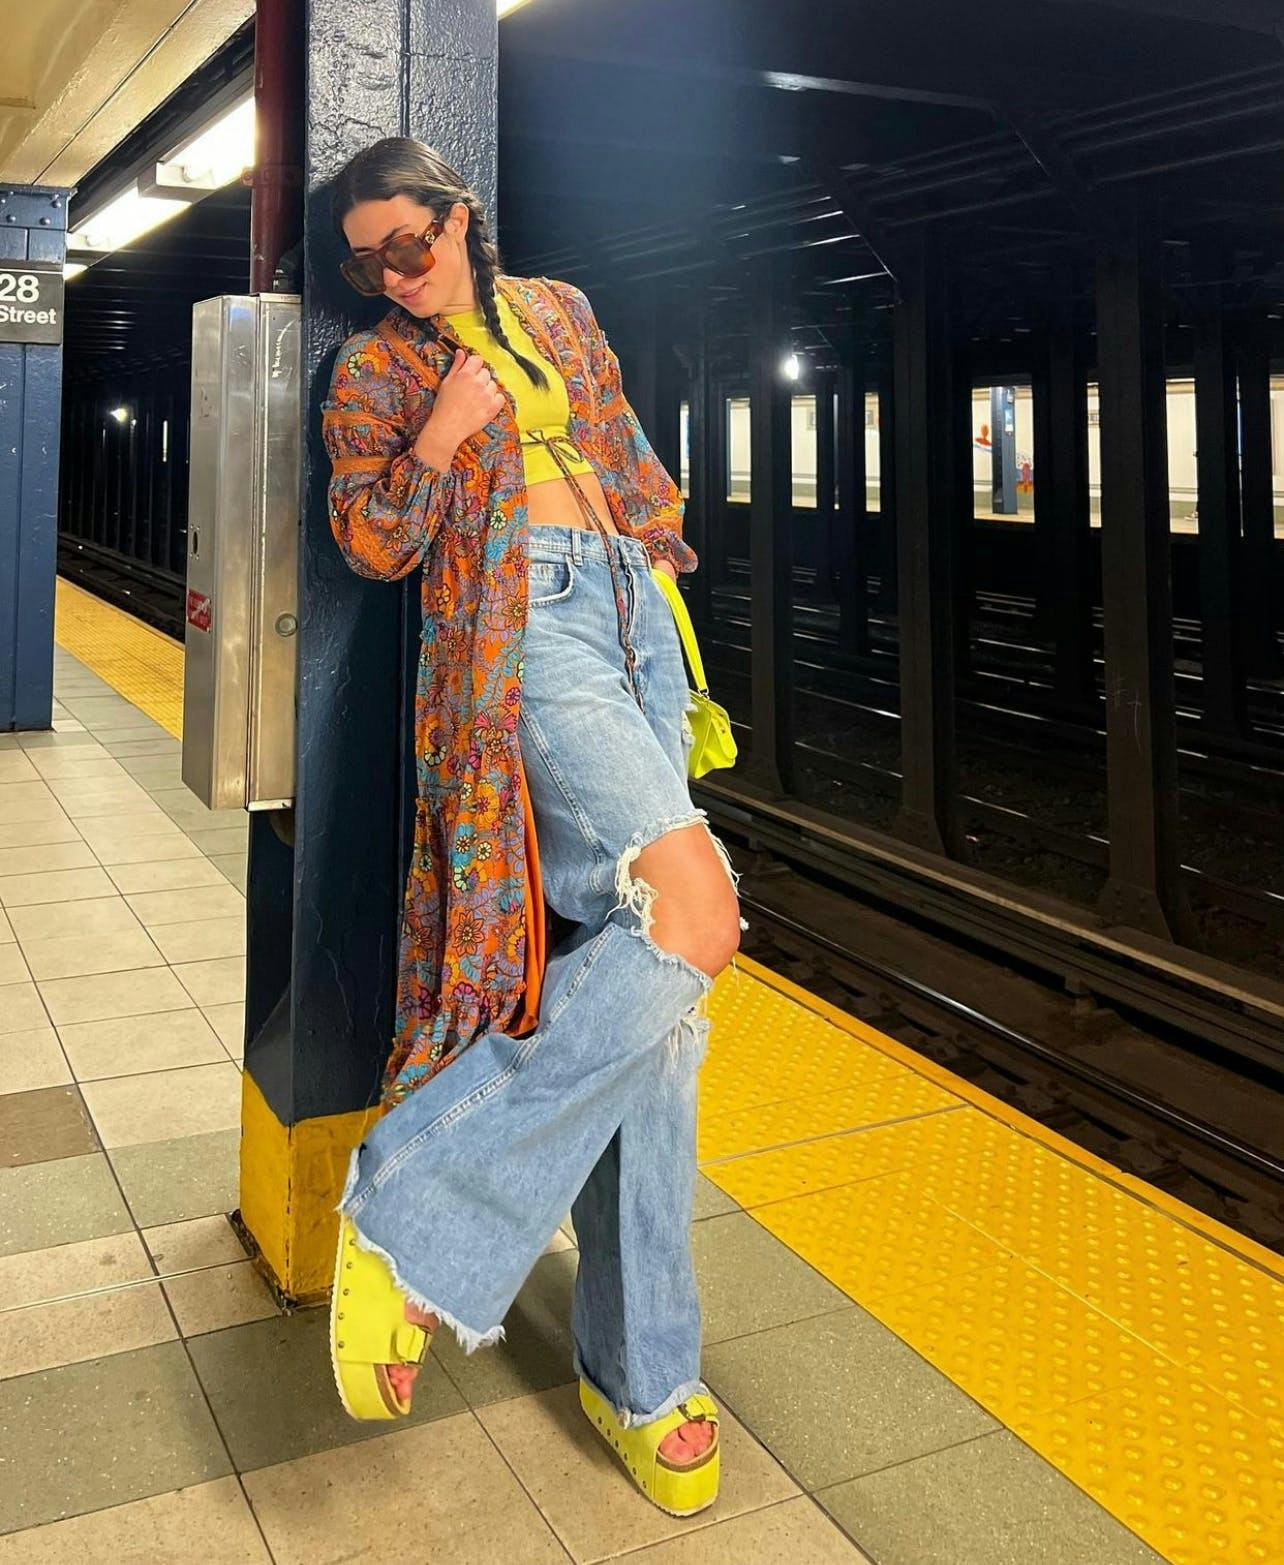 victoria paris in jeans and a yellow top and shoes